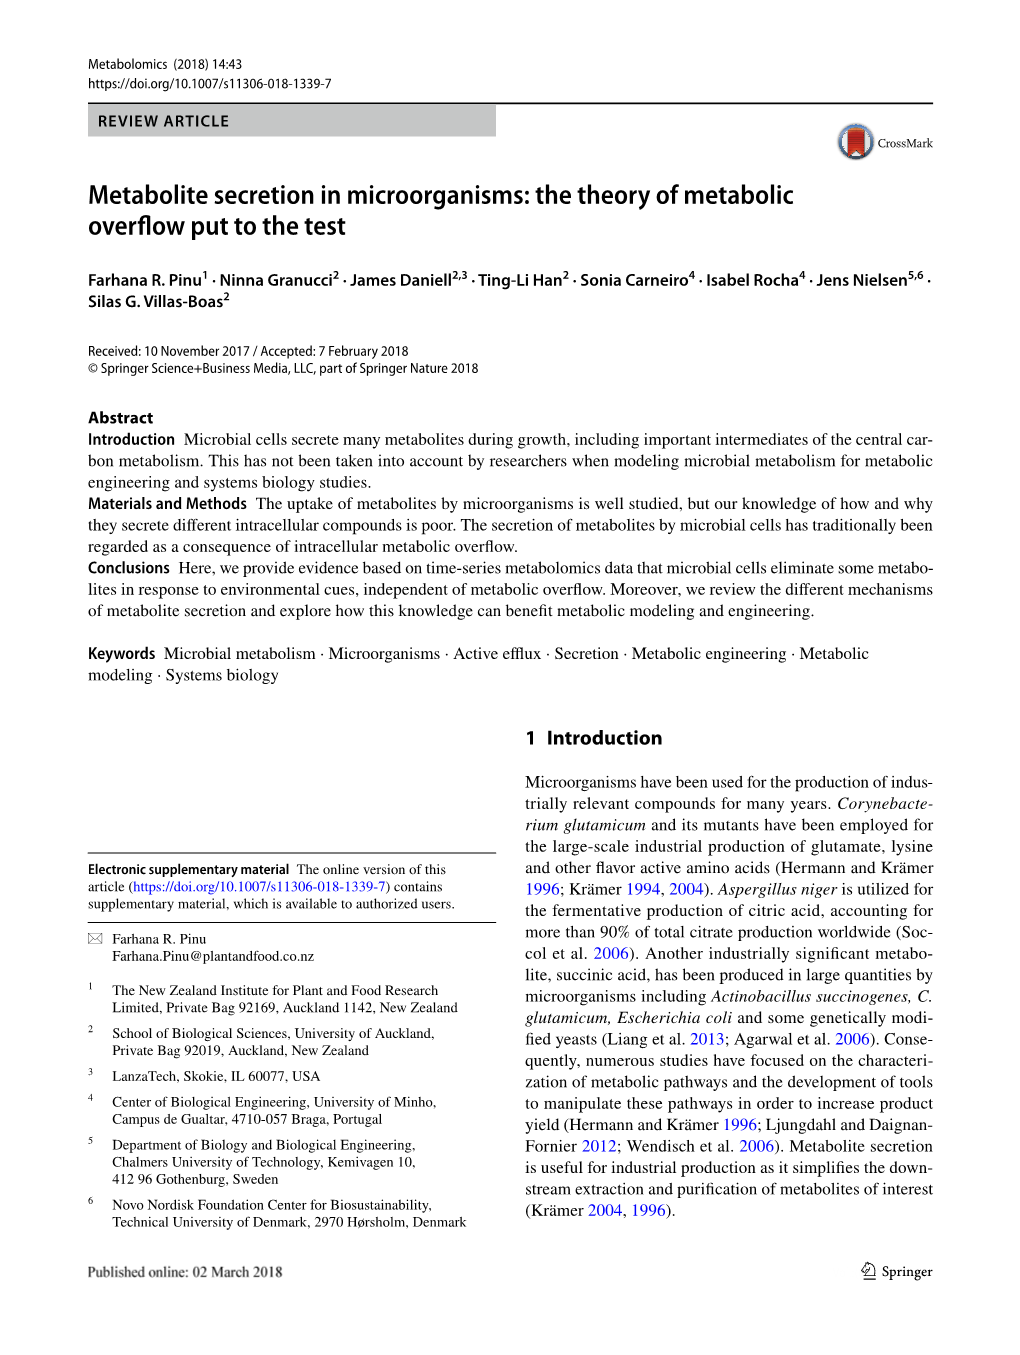 Metabolite Secretion in Microorganisms: the Theory of Metabolic Overflow Put to the Test